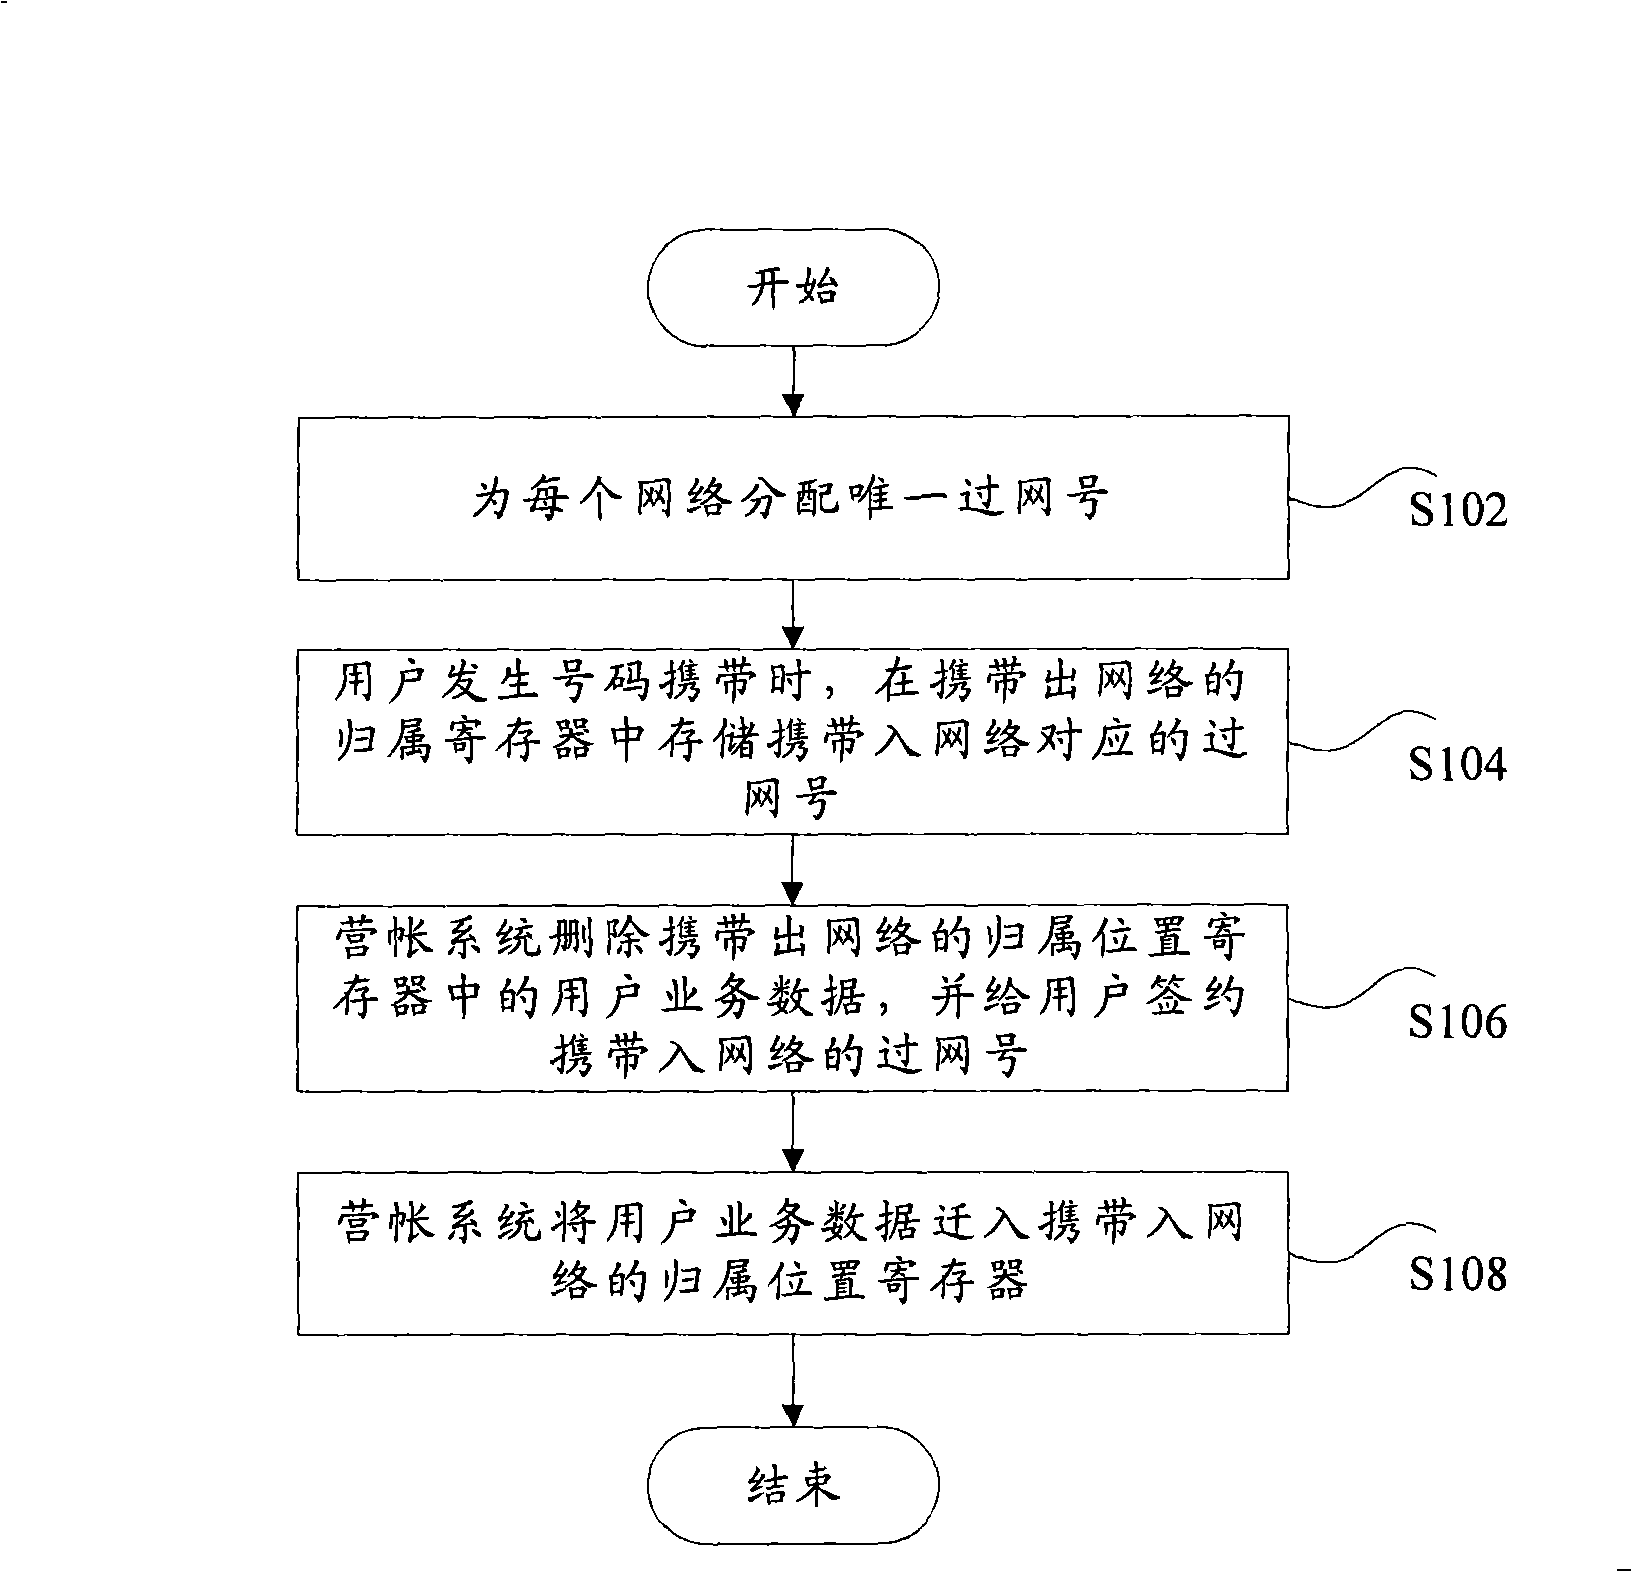 Method and apparatus for implementing carrying number as well as method for calling number-carried user